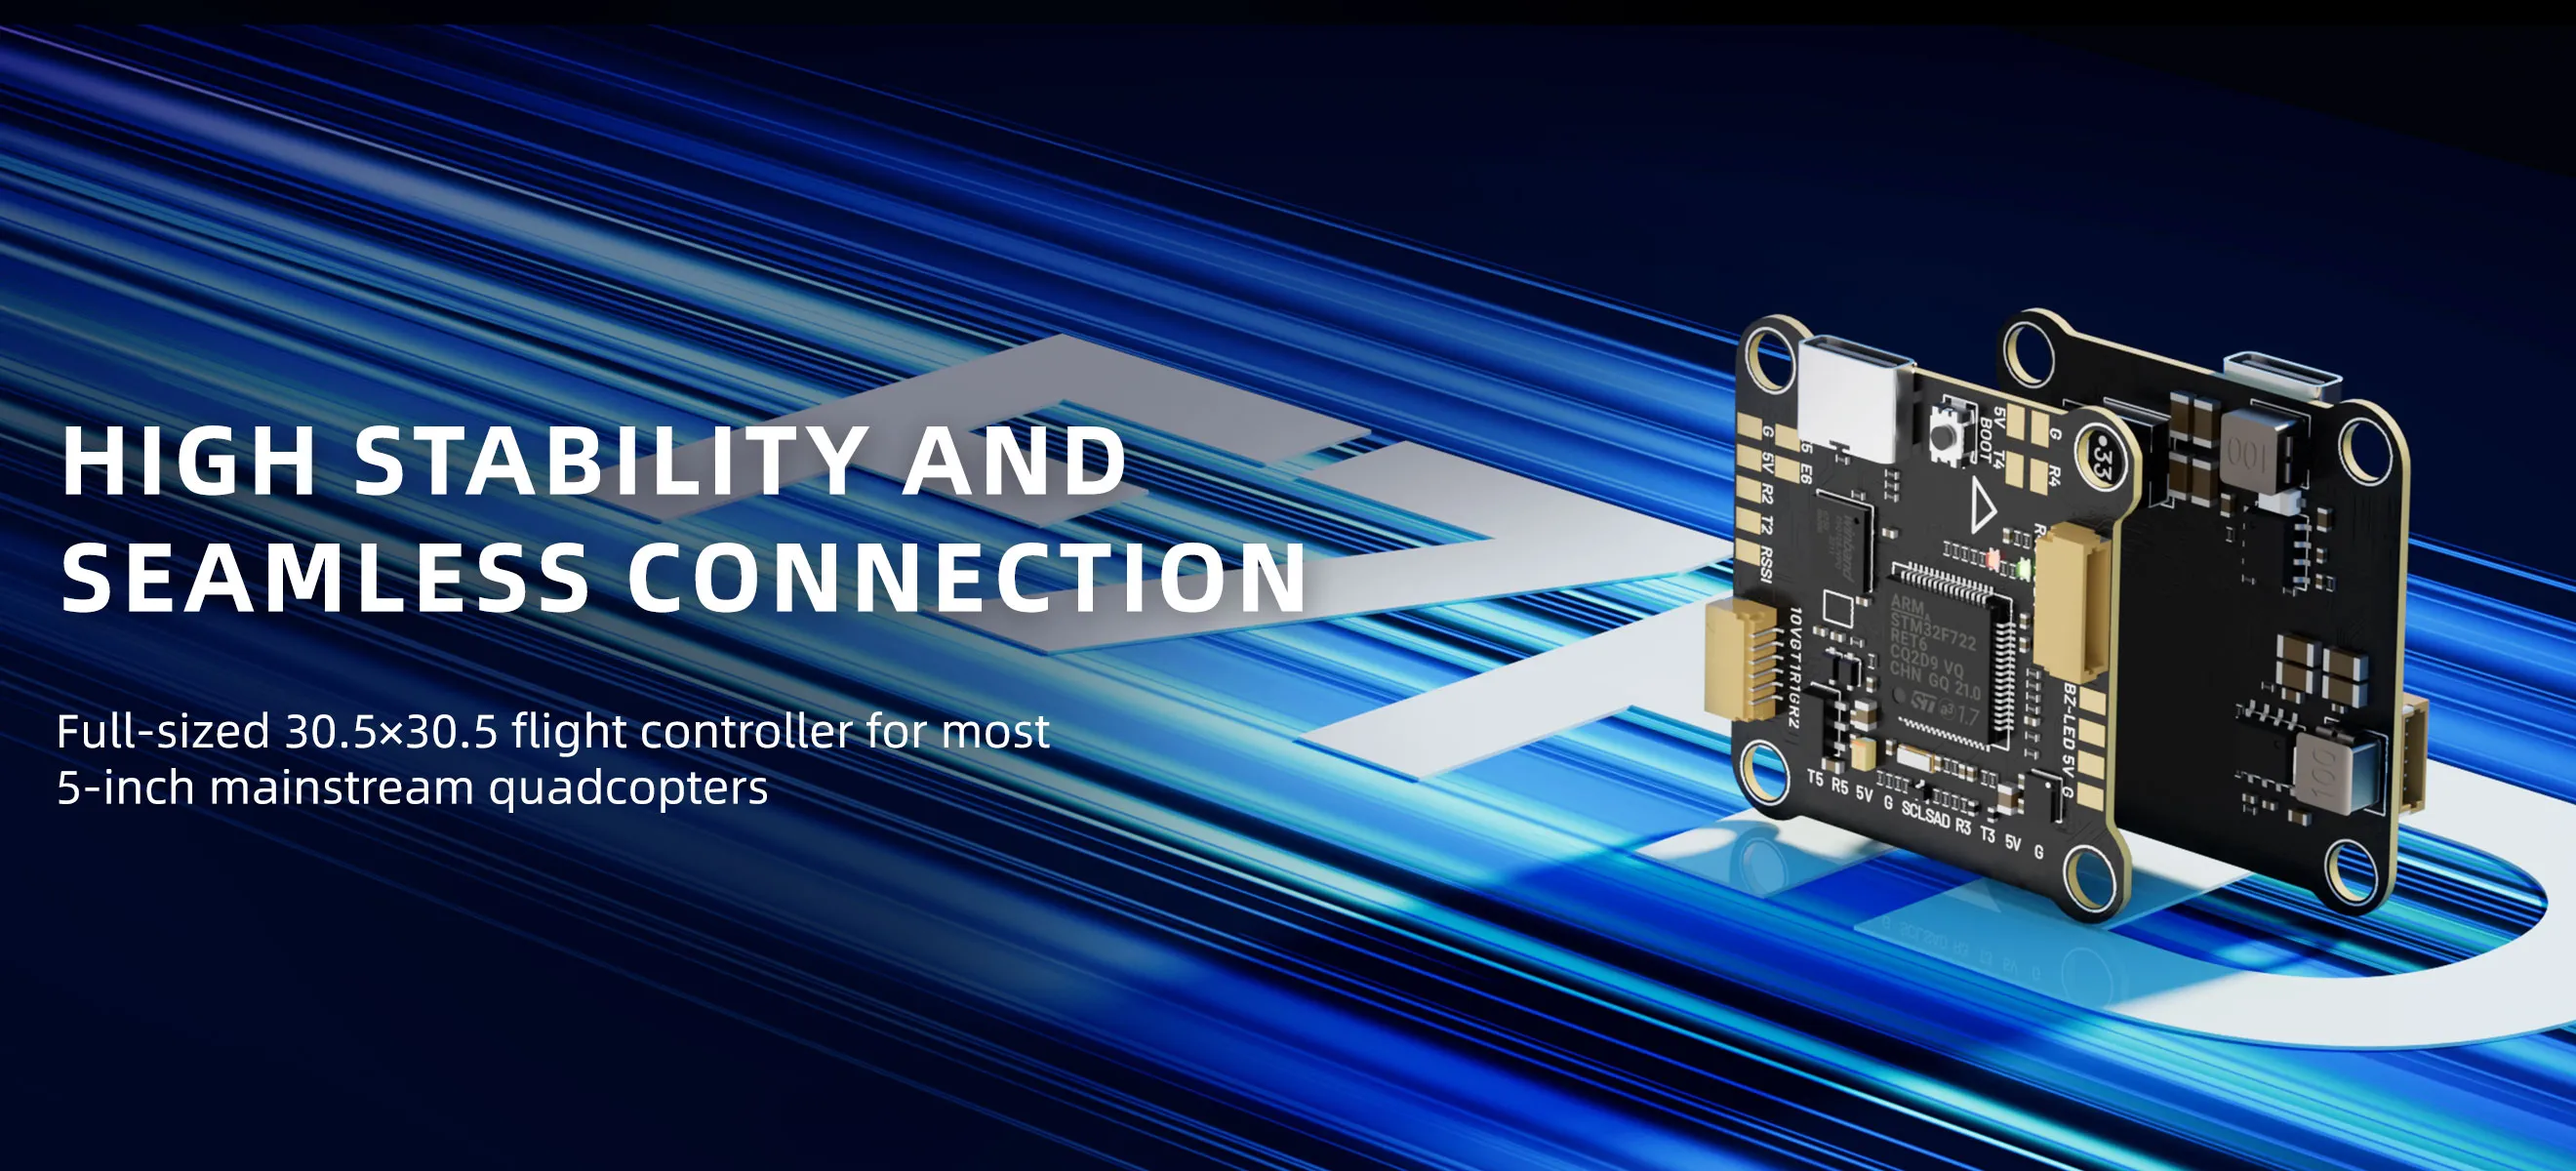 MEPS F7 HD flight controller with high stability and seamless connection